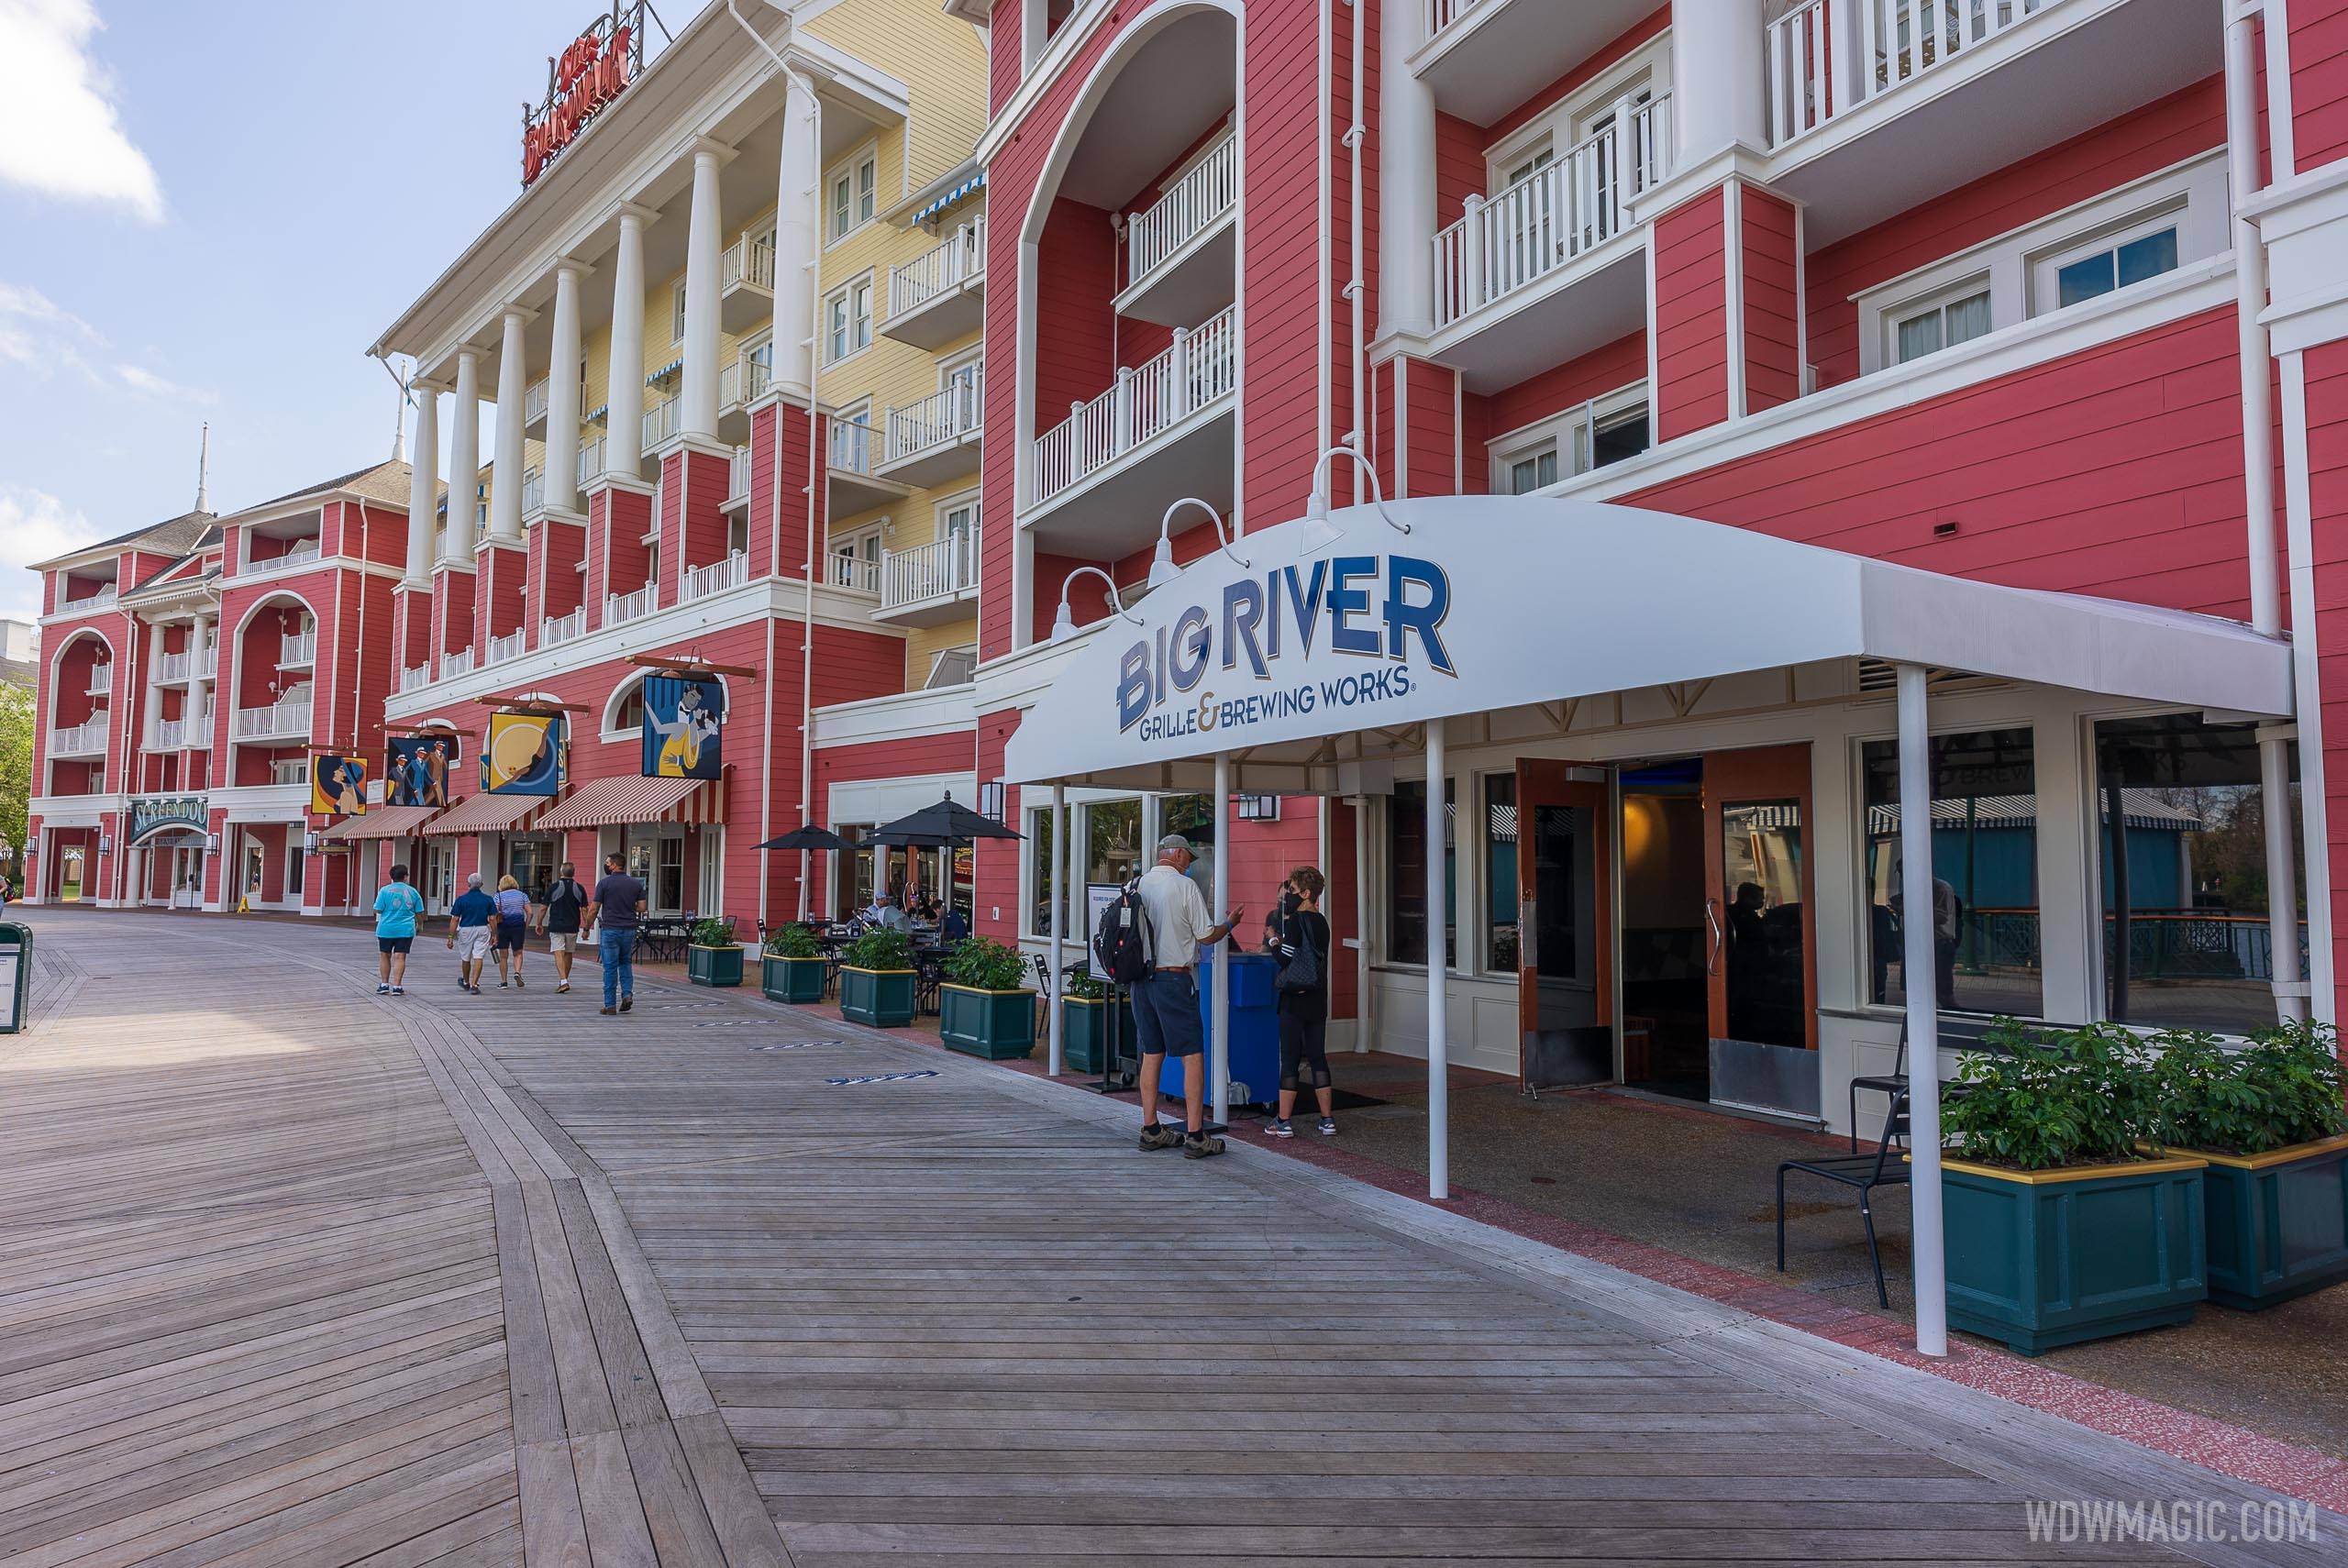 PHOTOS - Big River Grille and Brewing Works reopens on Disney's BoardWalk